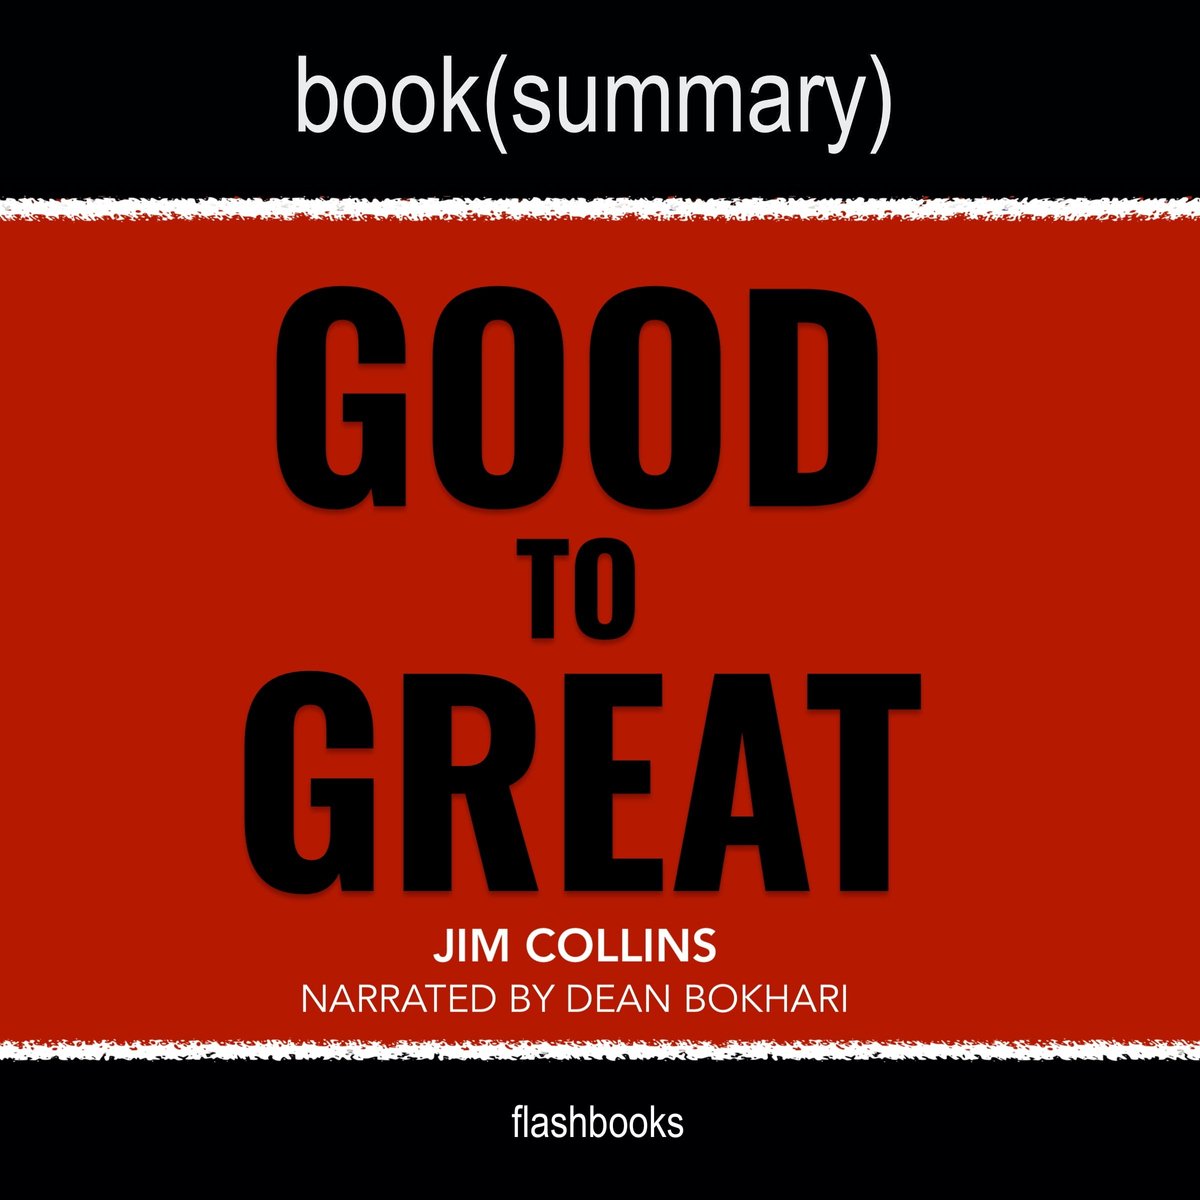 Good to Great by Jim Collins - Book Summary - Flashbooks